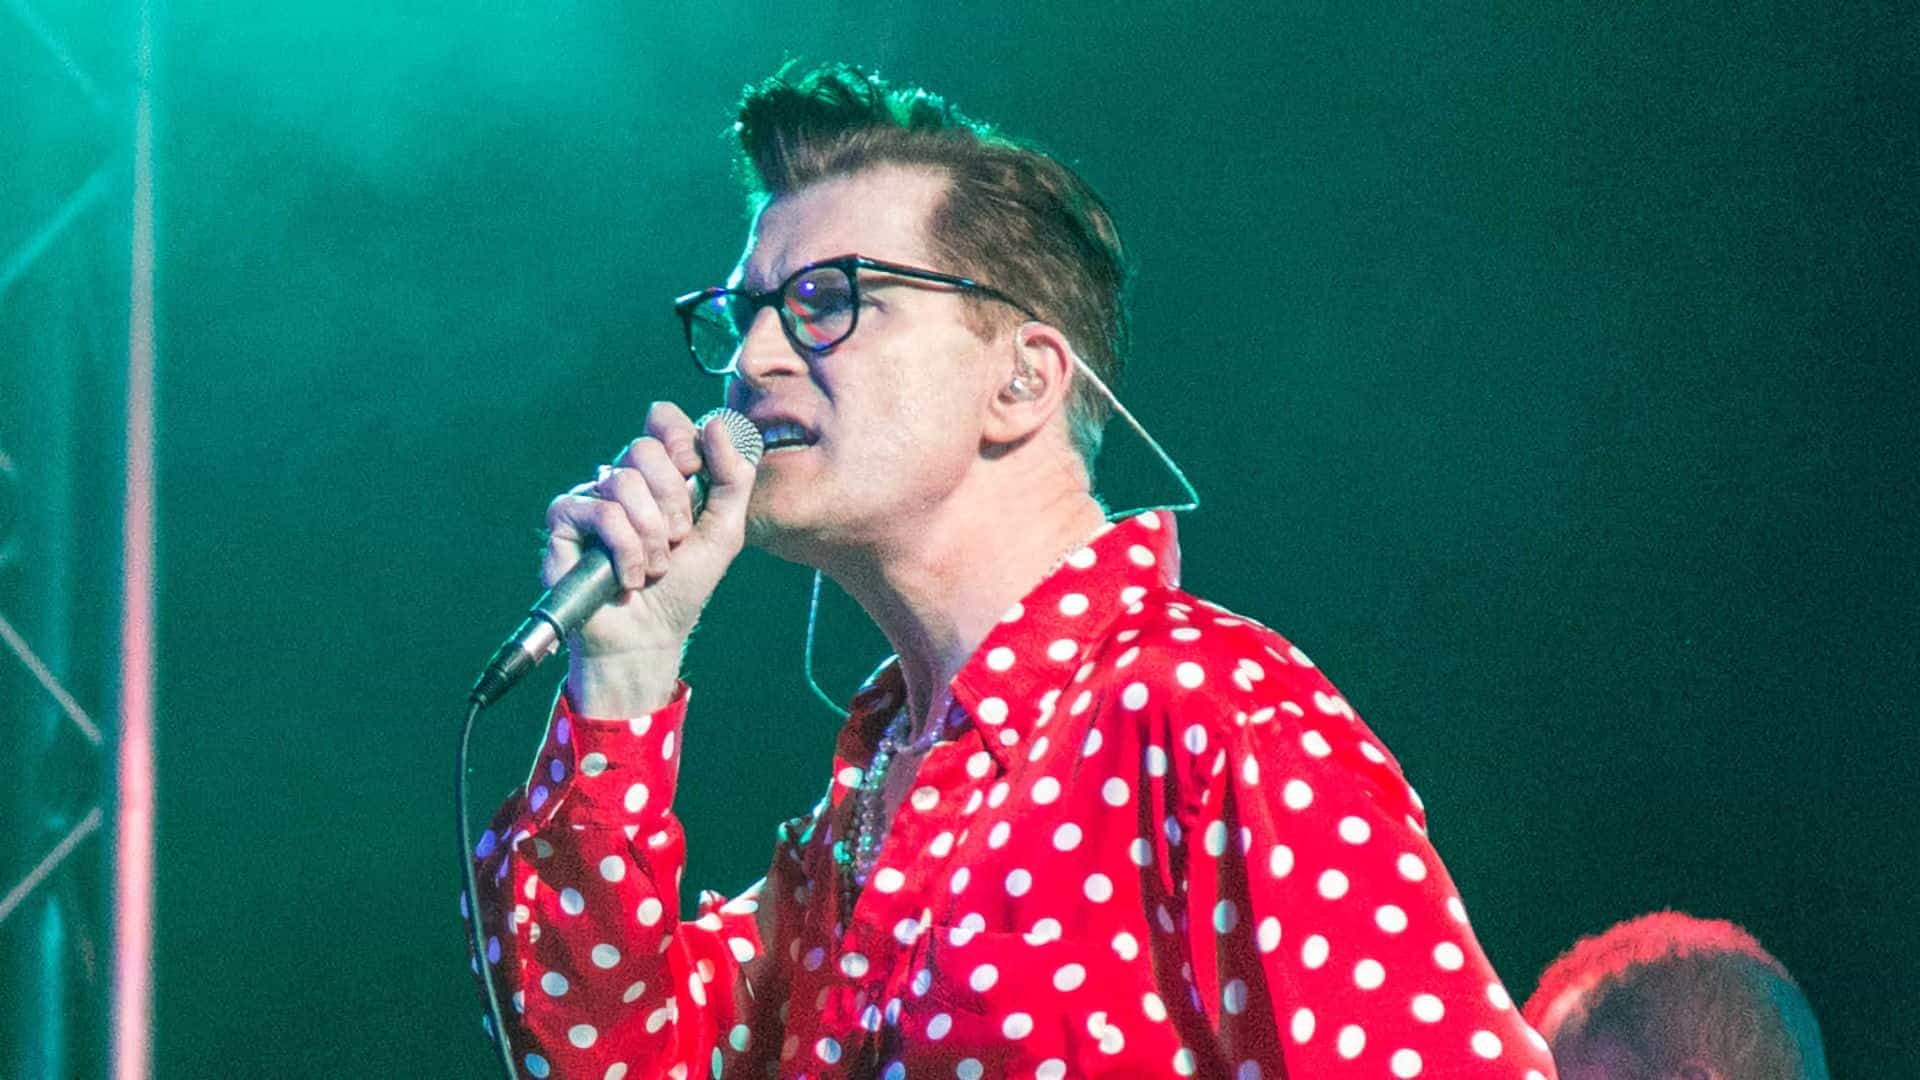 The Smyths - Tribute to The Smiths